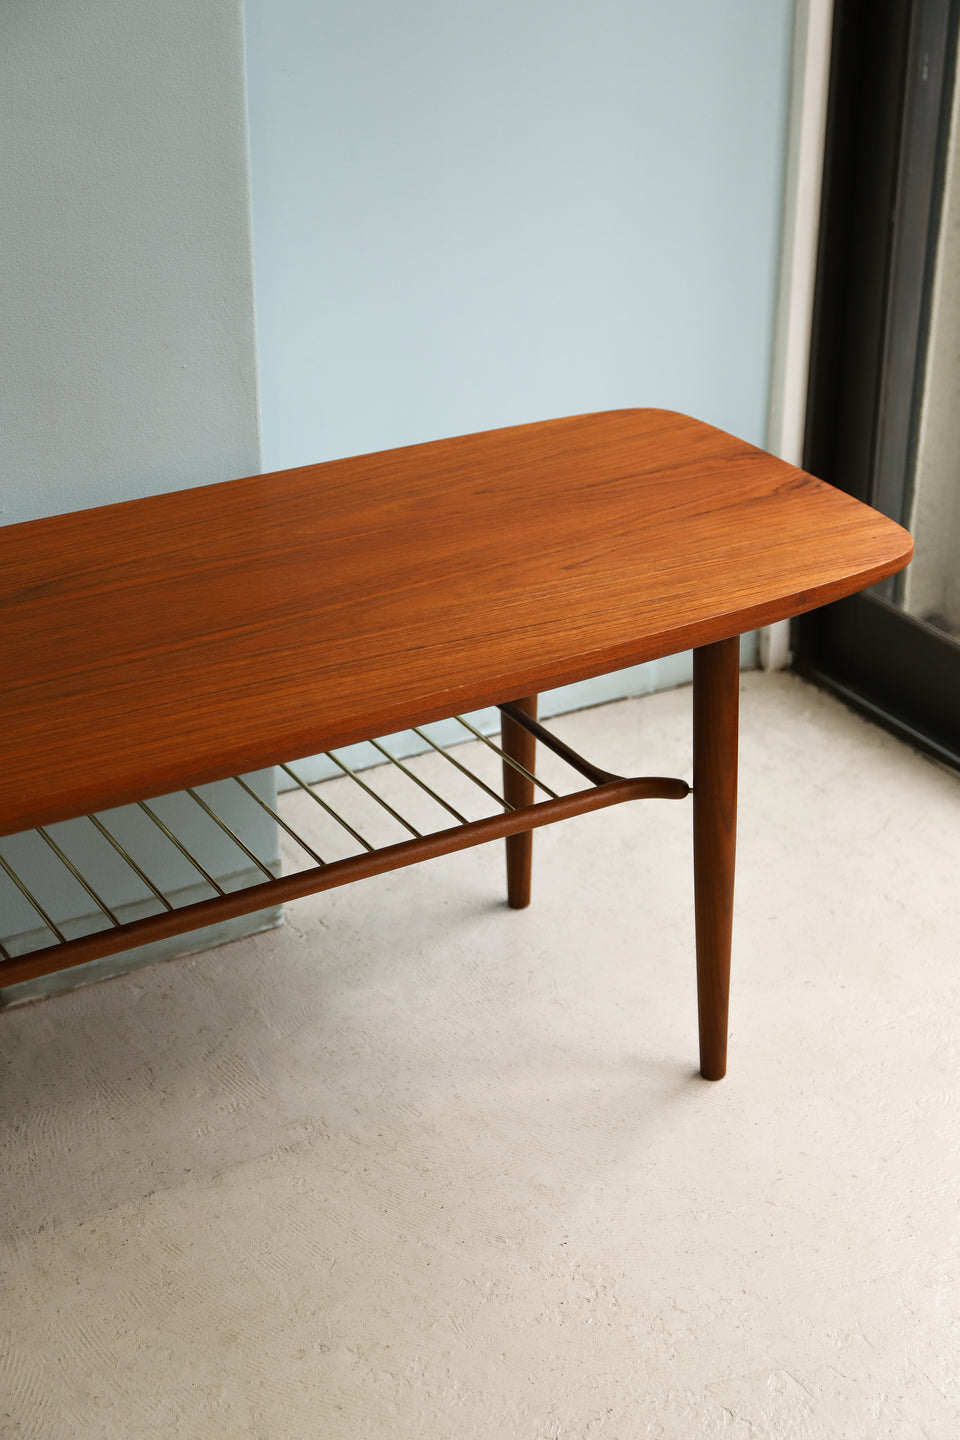 Danish Vintage Gorm Møbler Coffee Table with Rack/デンマークヴィンテージ コーヒーテーブル ラック付き 北欧家具